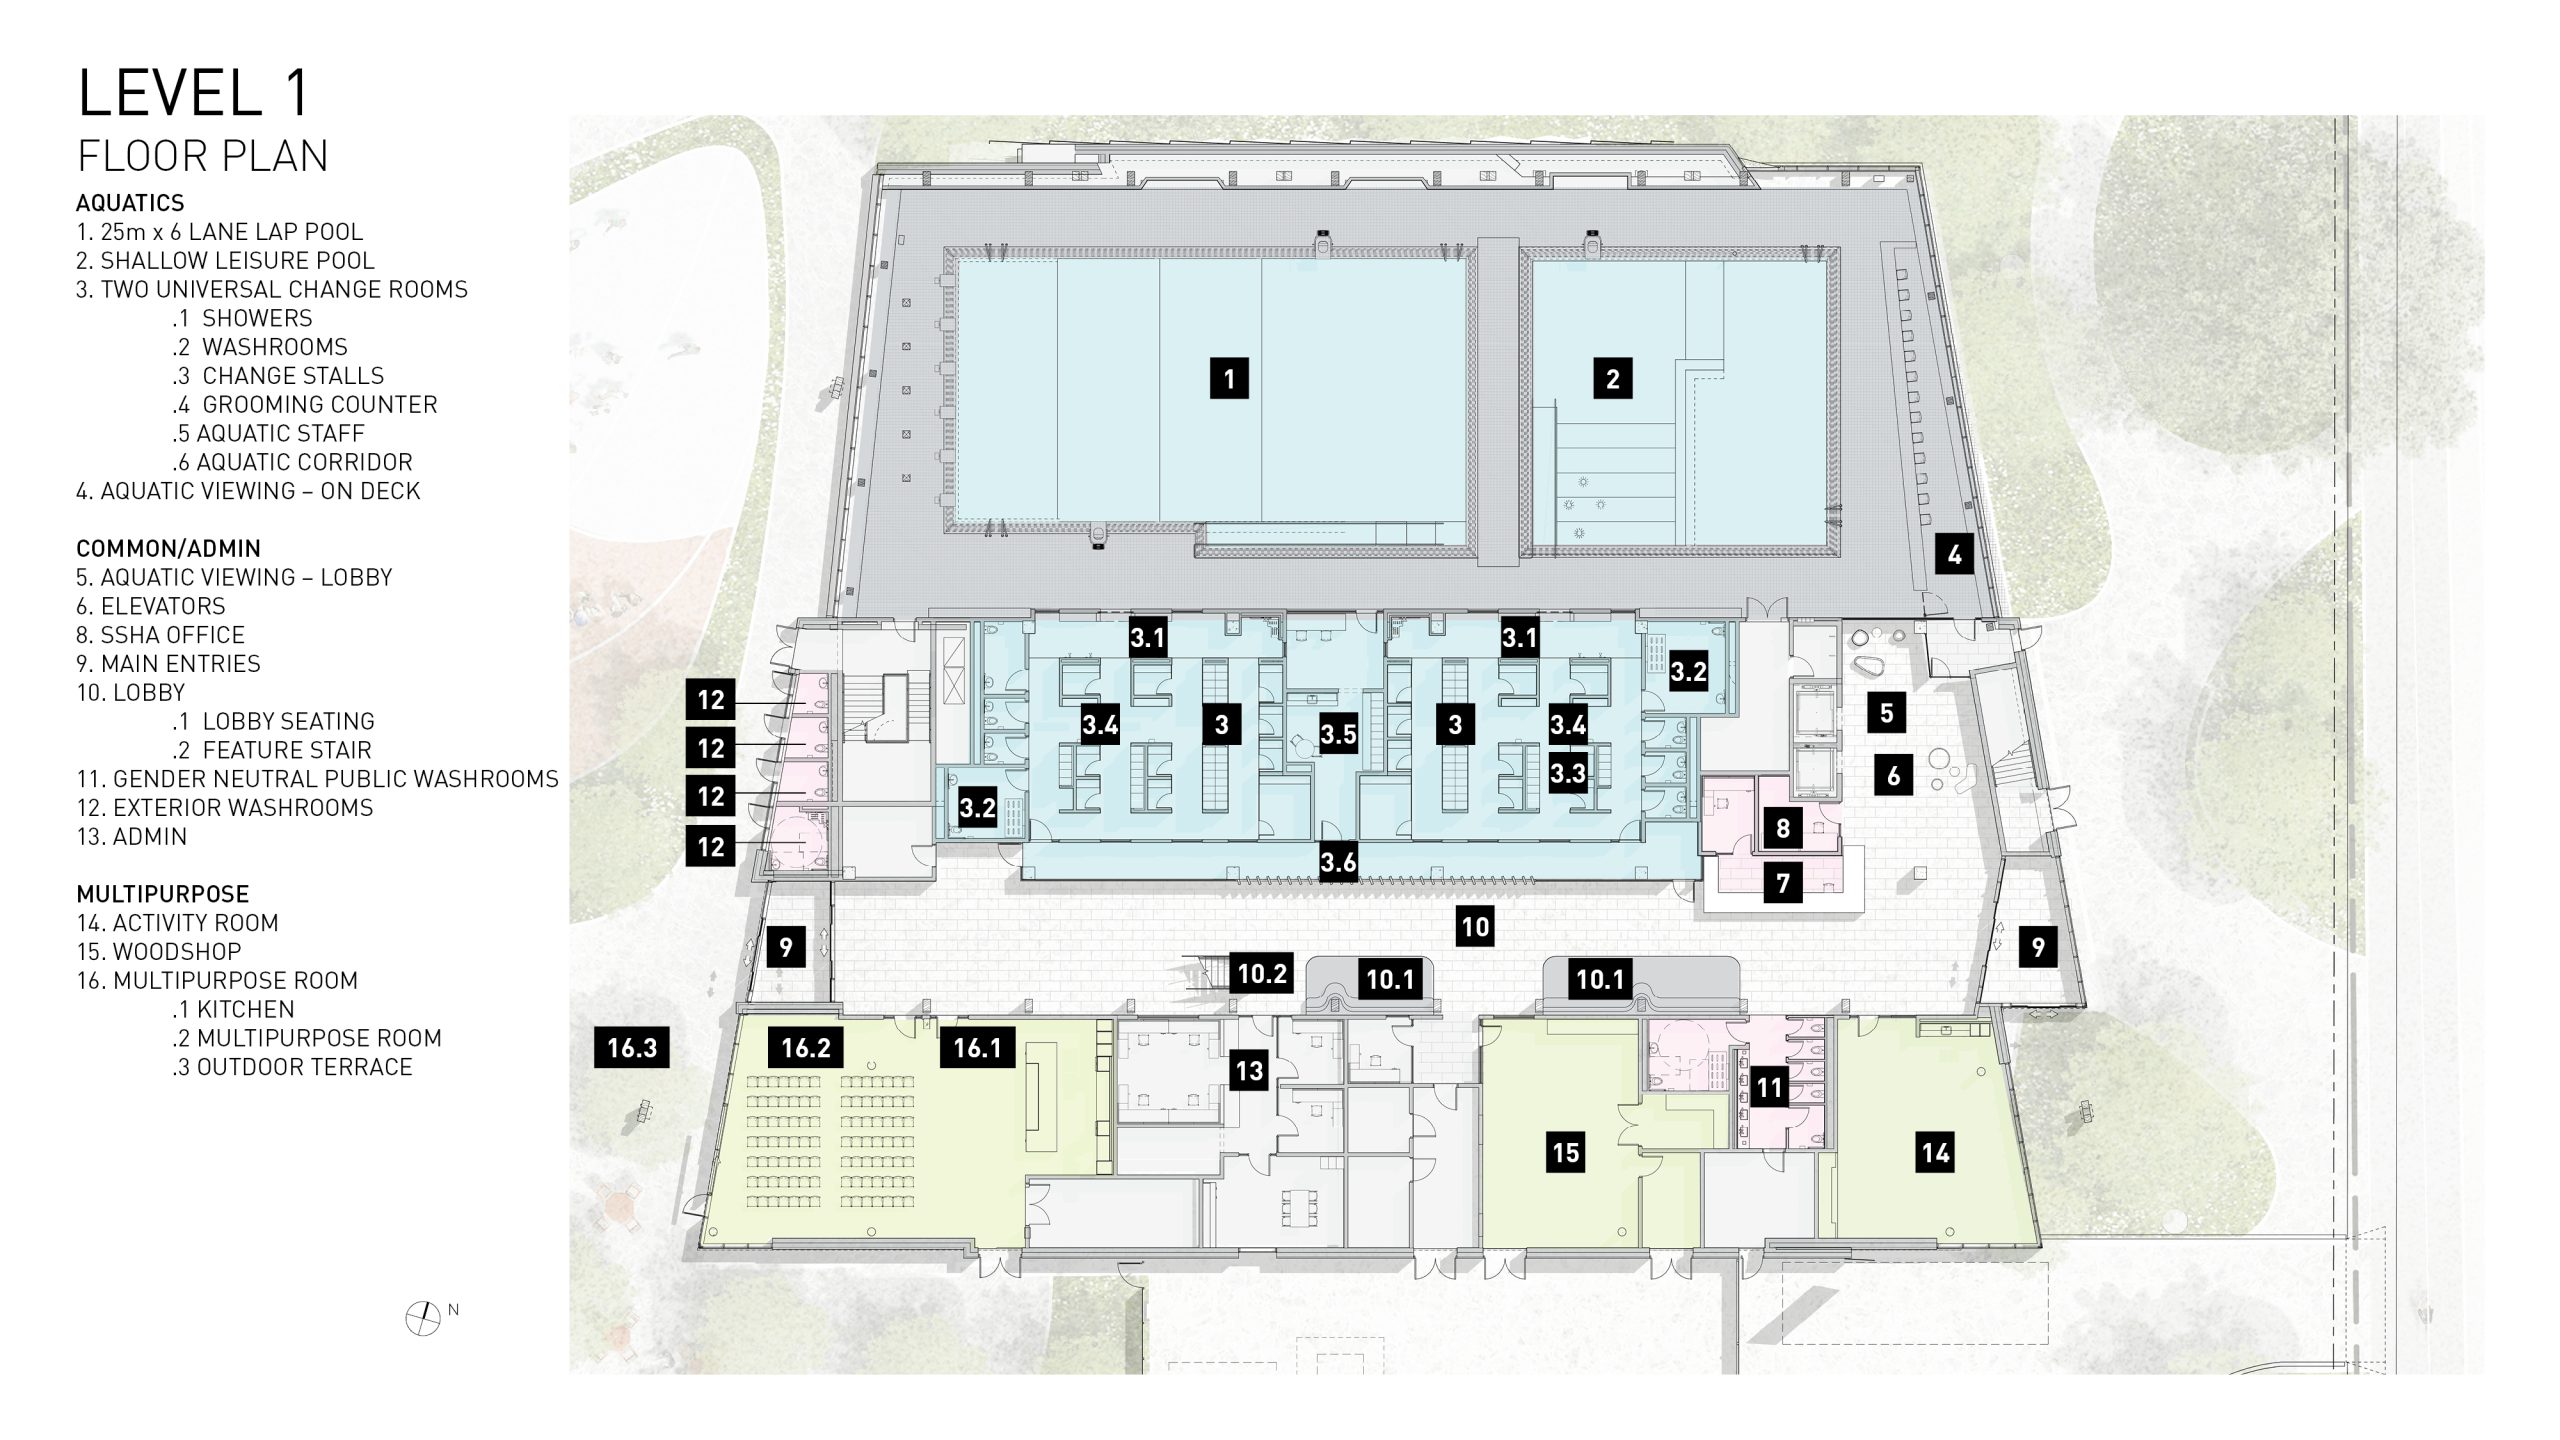 Plan detailing the ground floor. The Aquatic Hall is to the north. A centrally located “L” shaped lobby connects the Aquatic Hall to the north and main Sherbourne Street entry on the east. Reception is located adjacent the main entry. Multipurpose rooms and admin spaces line the south side of the lobby, which extends up to 4 storeys in height above. On the east side, an activity room has views onto Sherbourne Street. Public washrooms are between the east activity room and the wood shop and exterior washrooms have been provided on the west face of the building to the north of the park entry.